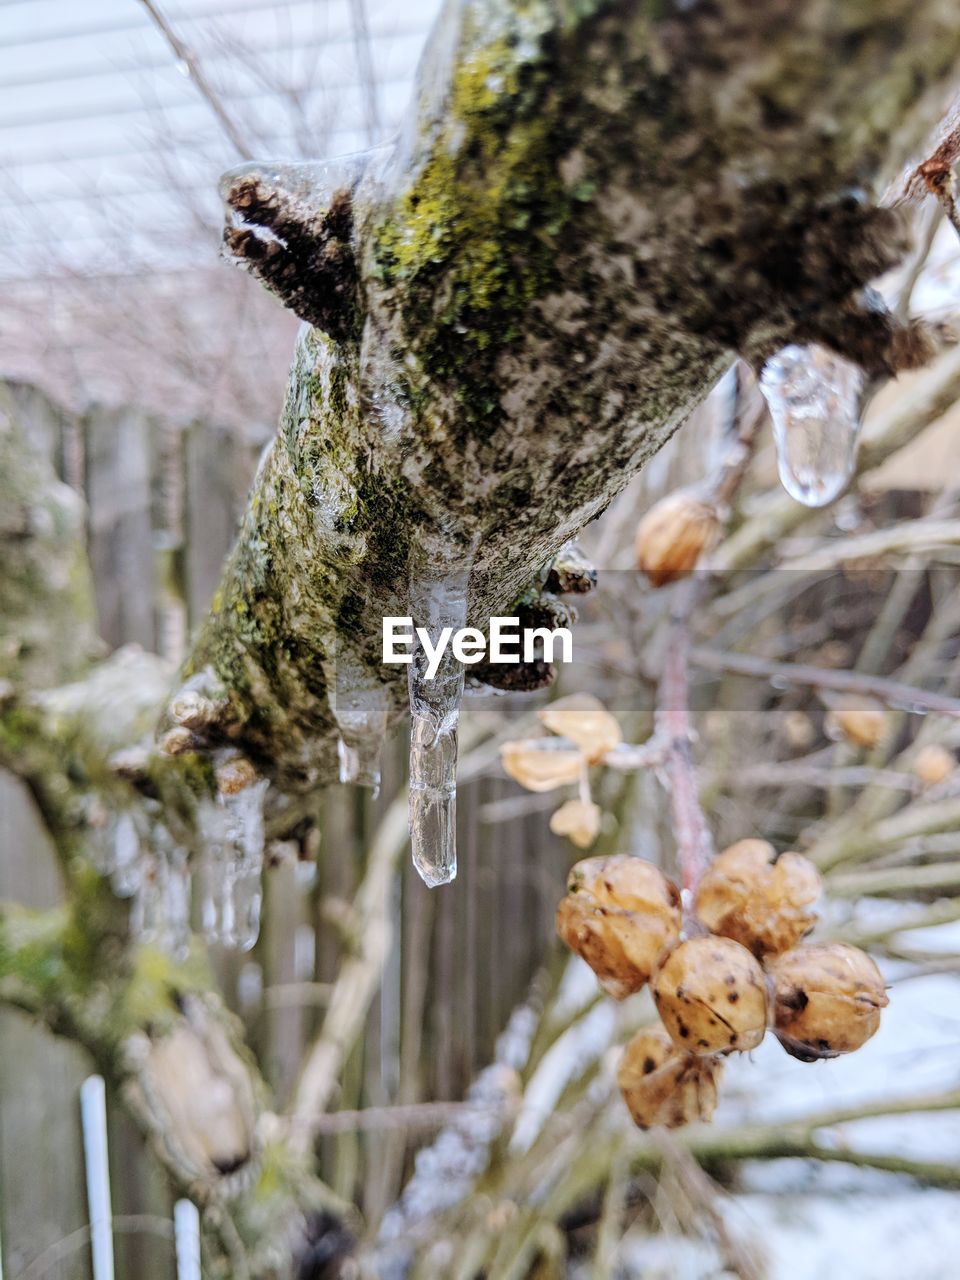 CLOSE-UP OF FROZEN PLANT ON TREE